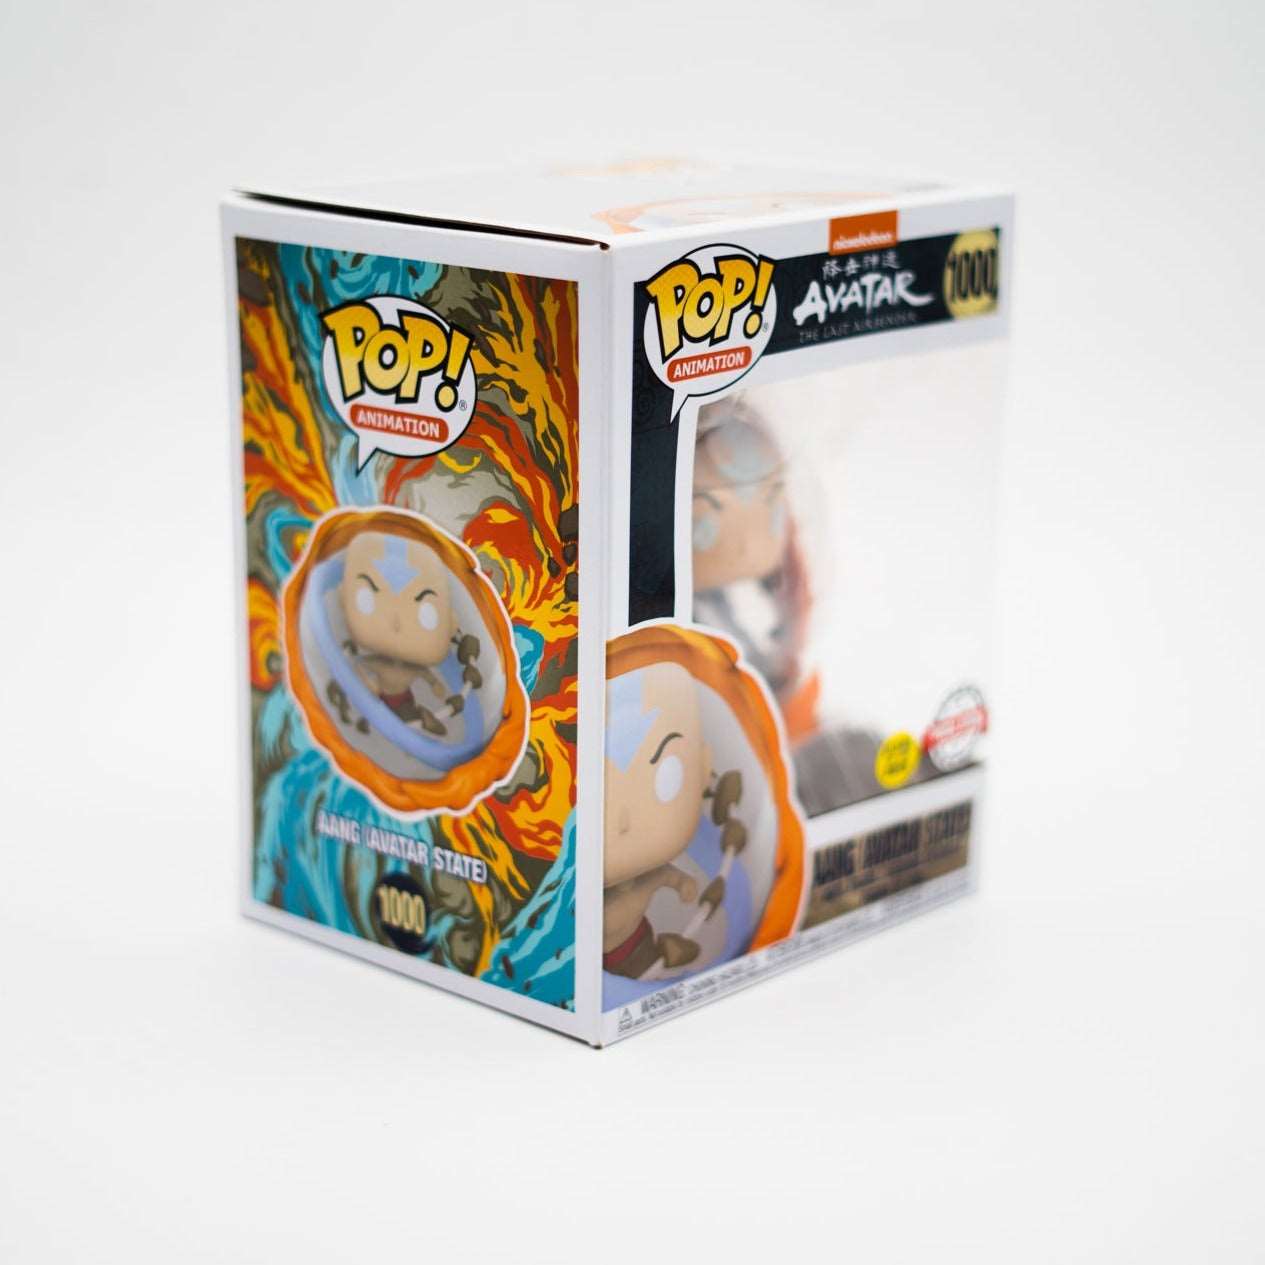 Funko Pop!  Avatar - Aang Avatar State 1000 (Glow In The Dark) Special Edition